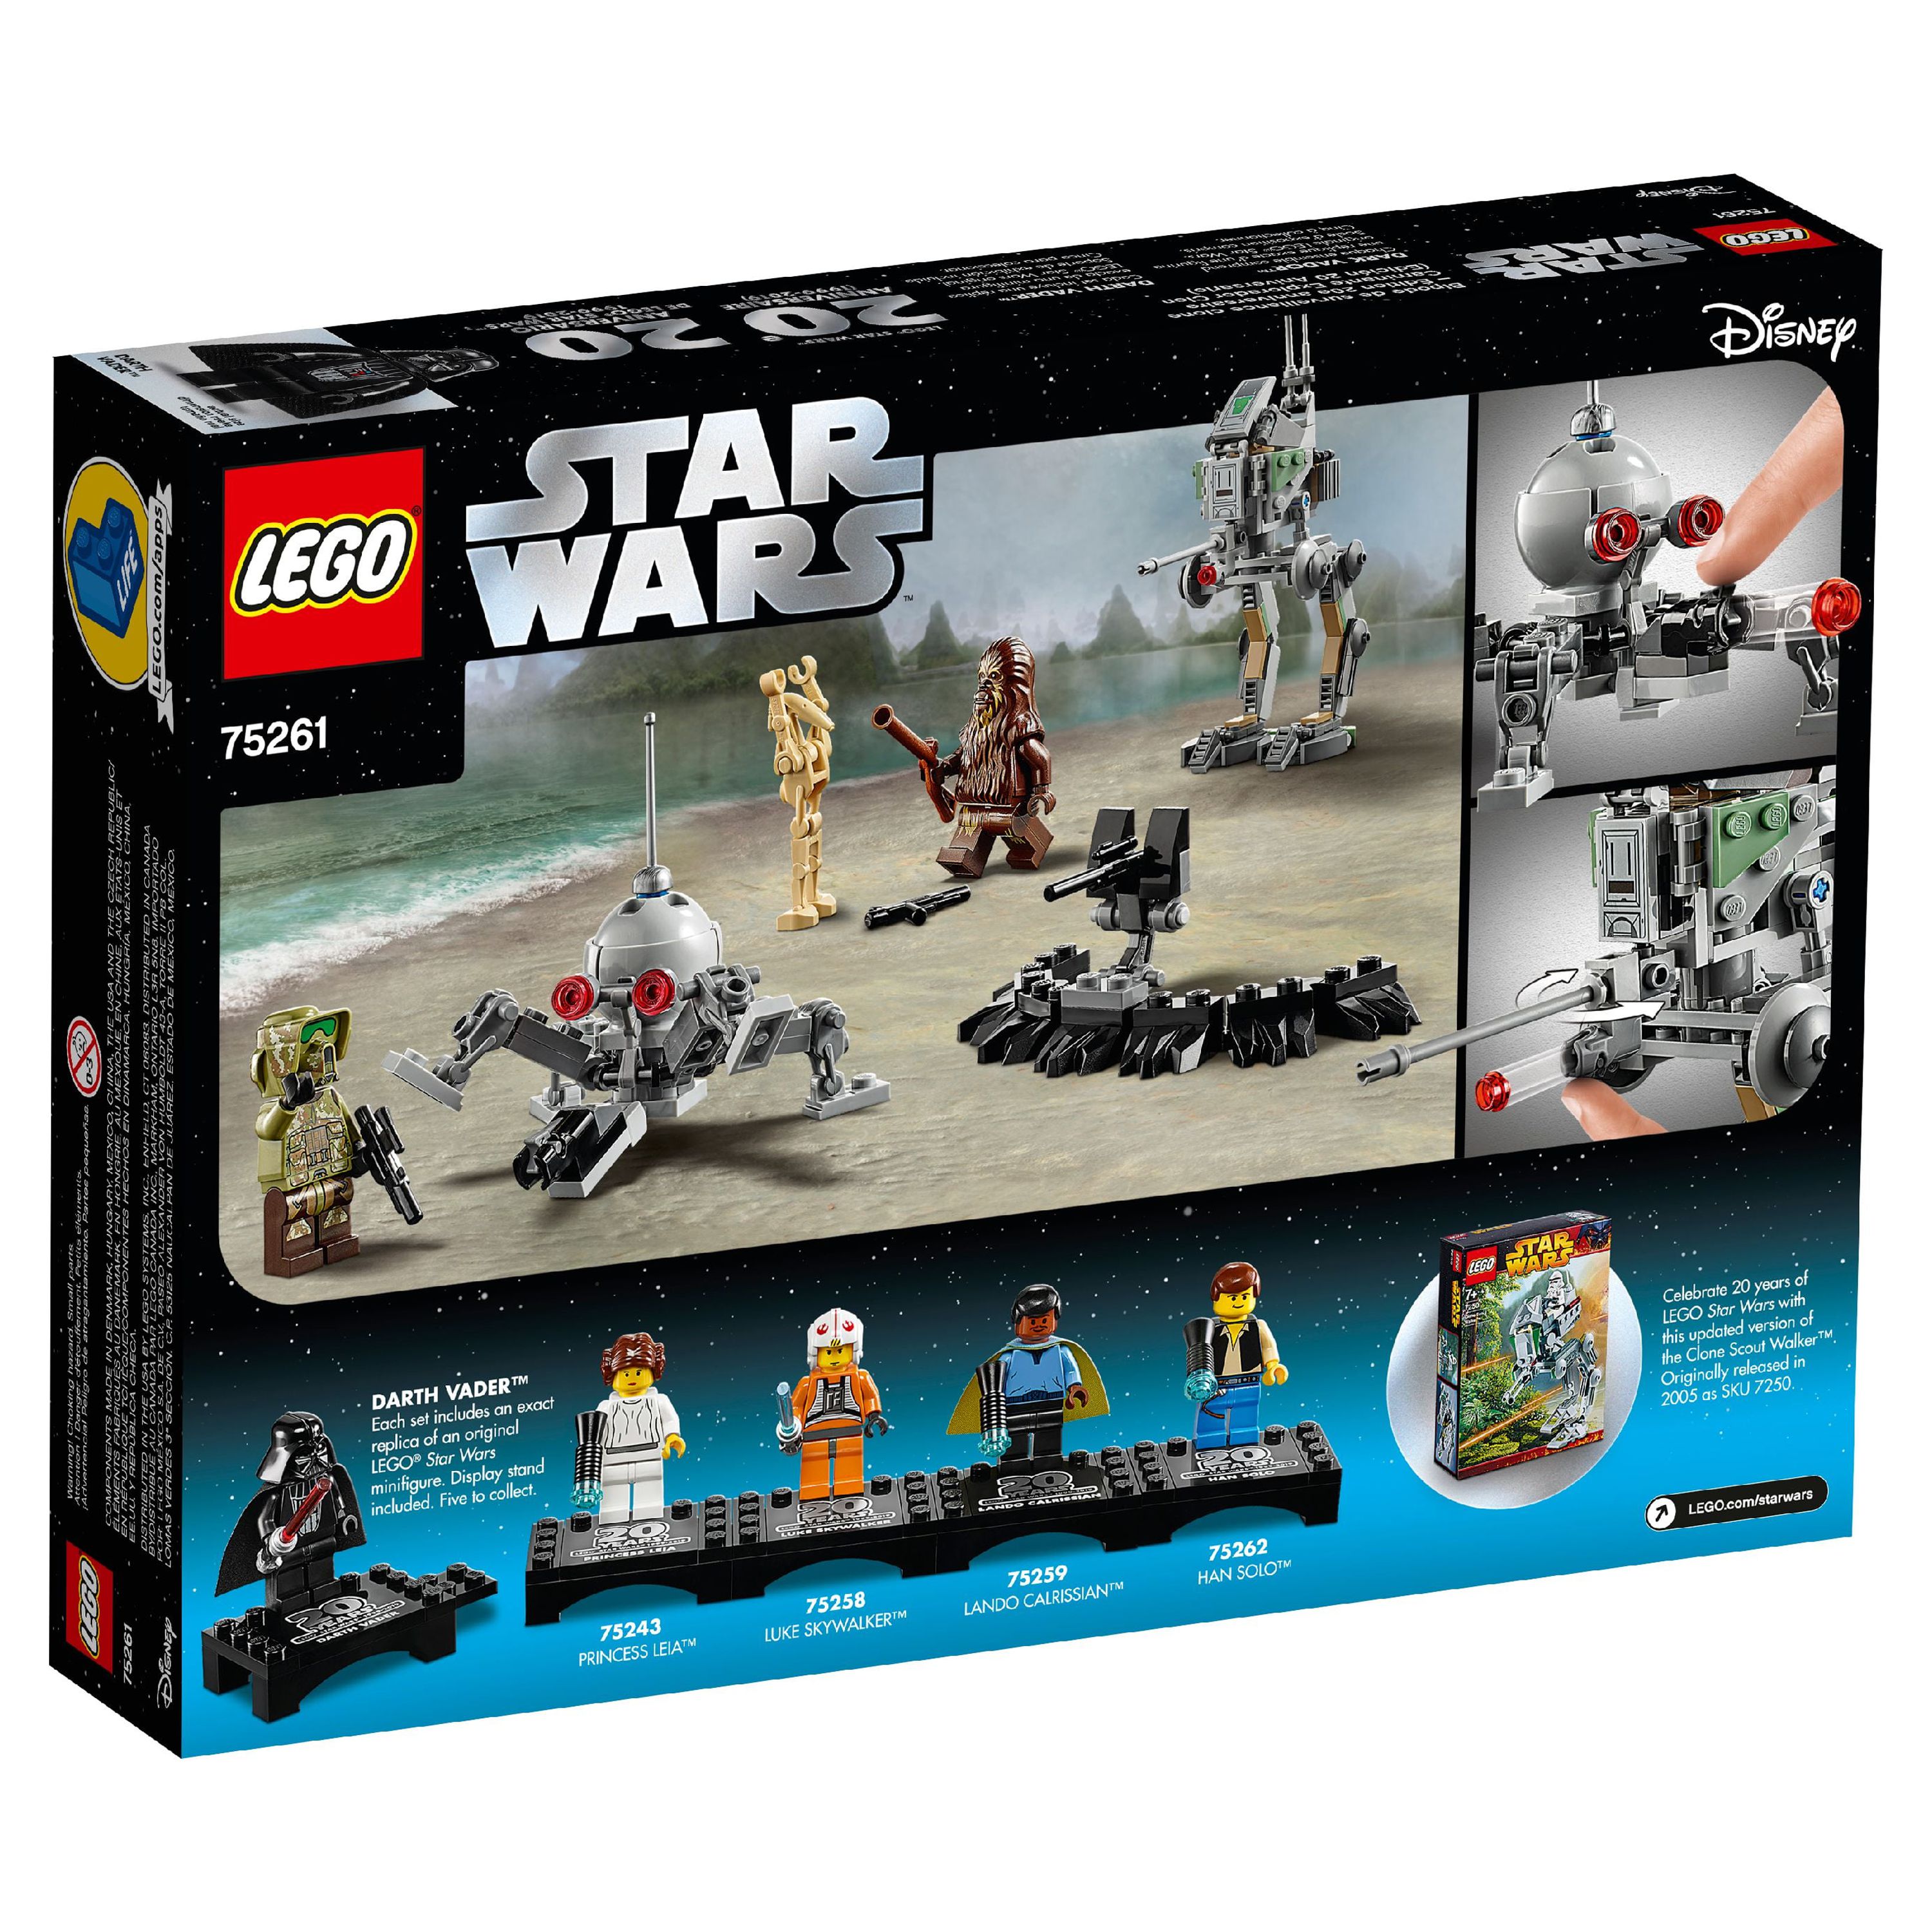 LEGO Star Wars 20th Anniversary Edition Clone Scout Walker 75261 Building Set - image 5 of 7